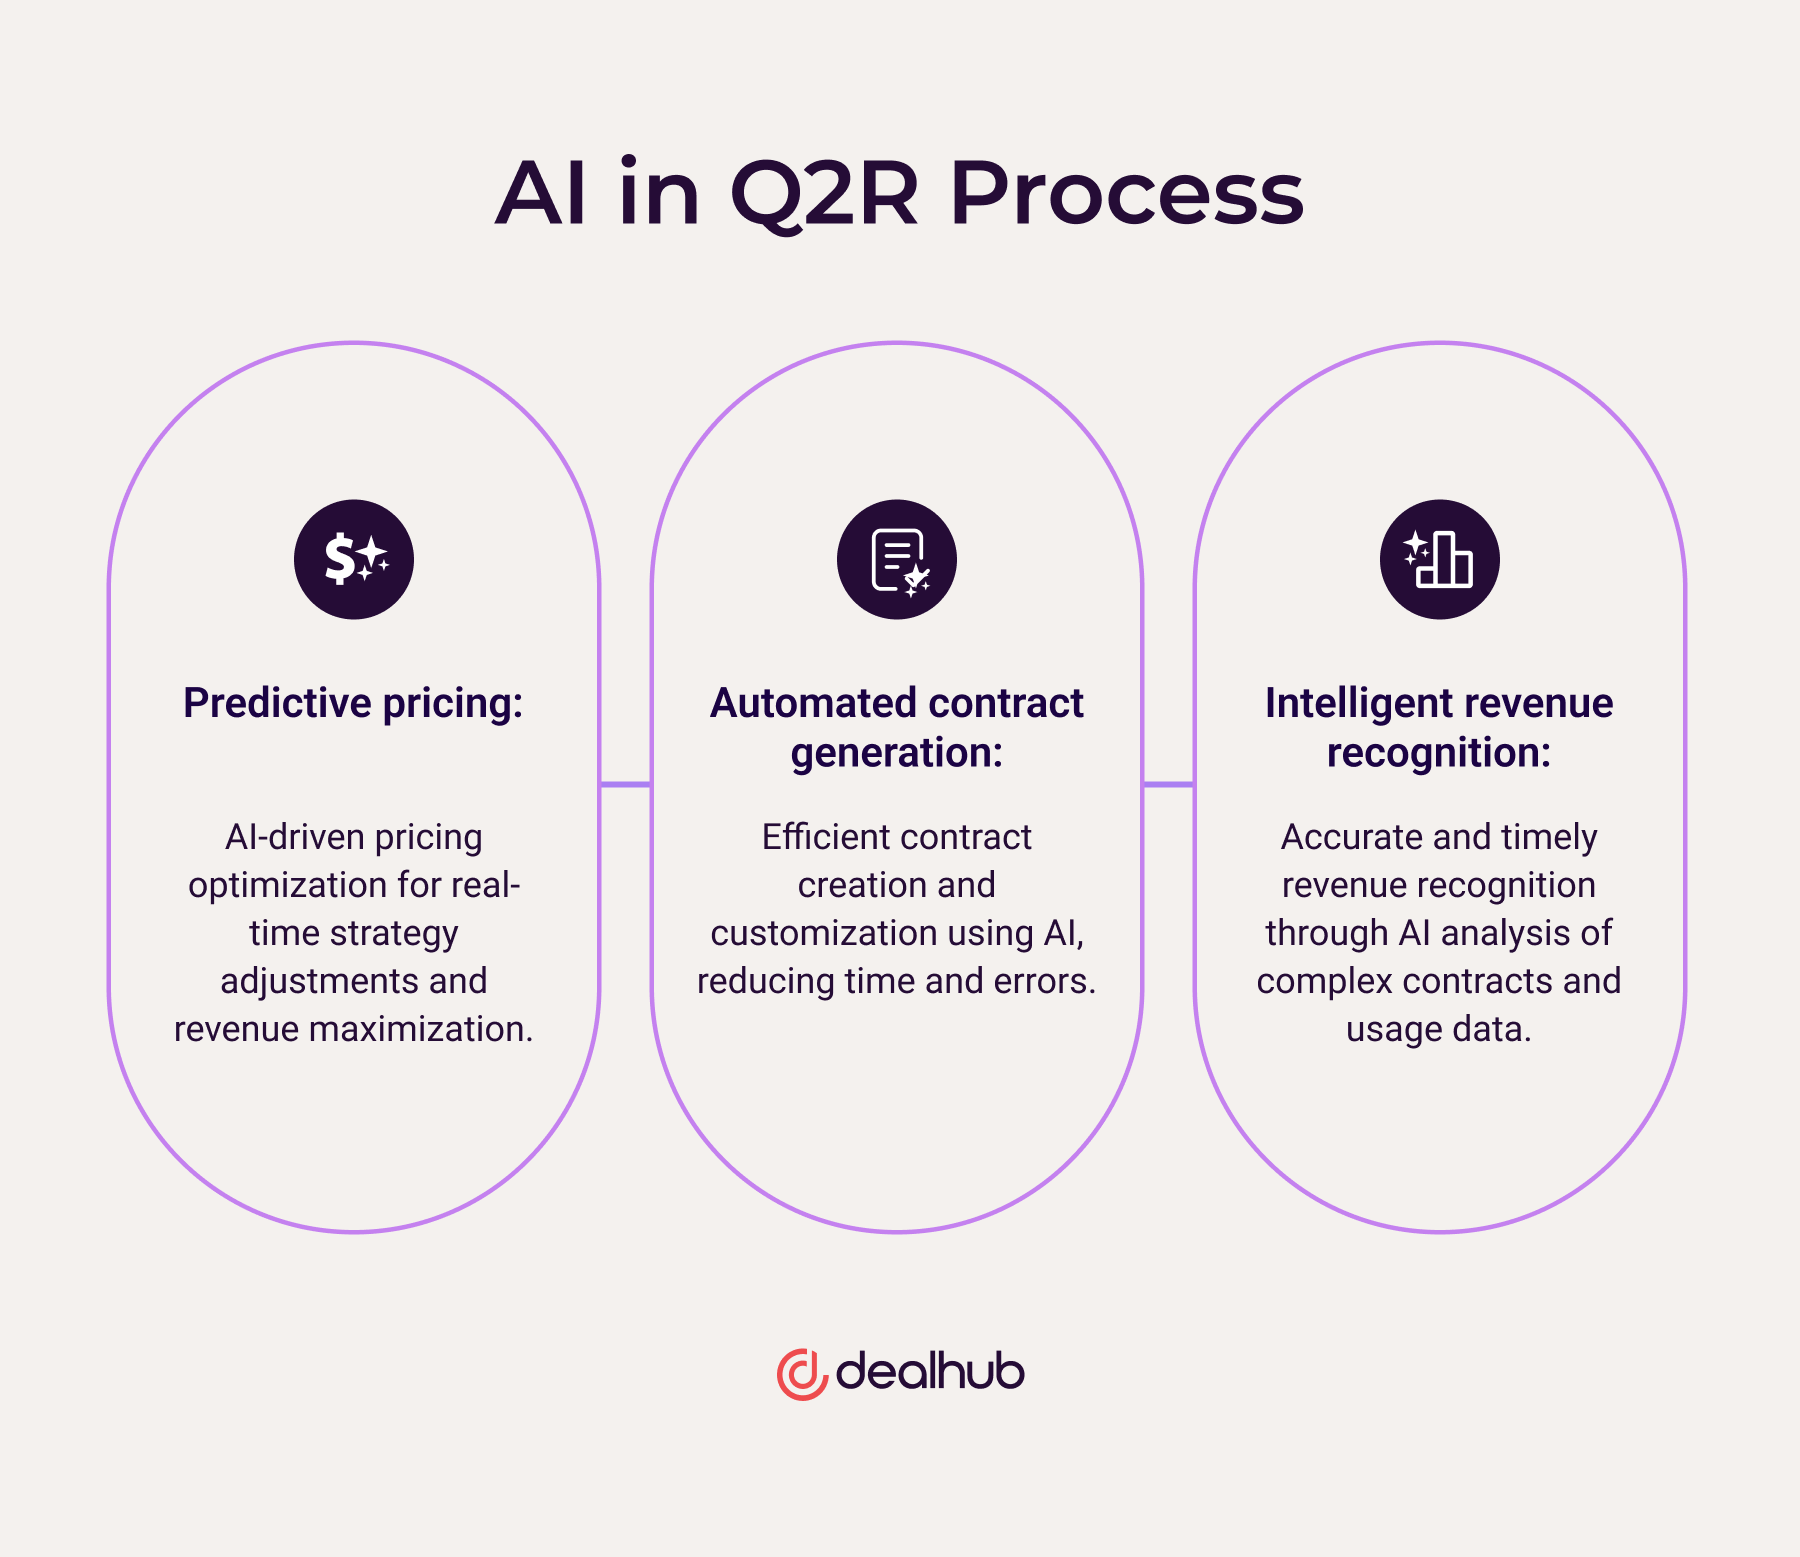 The role of AI in quote-to-revenue